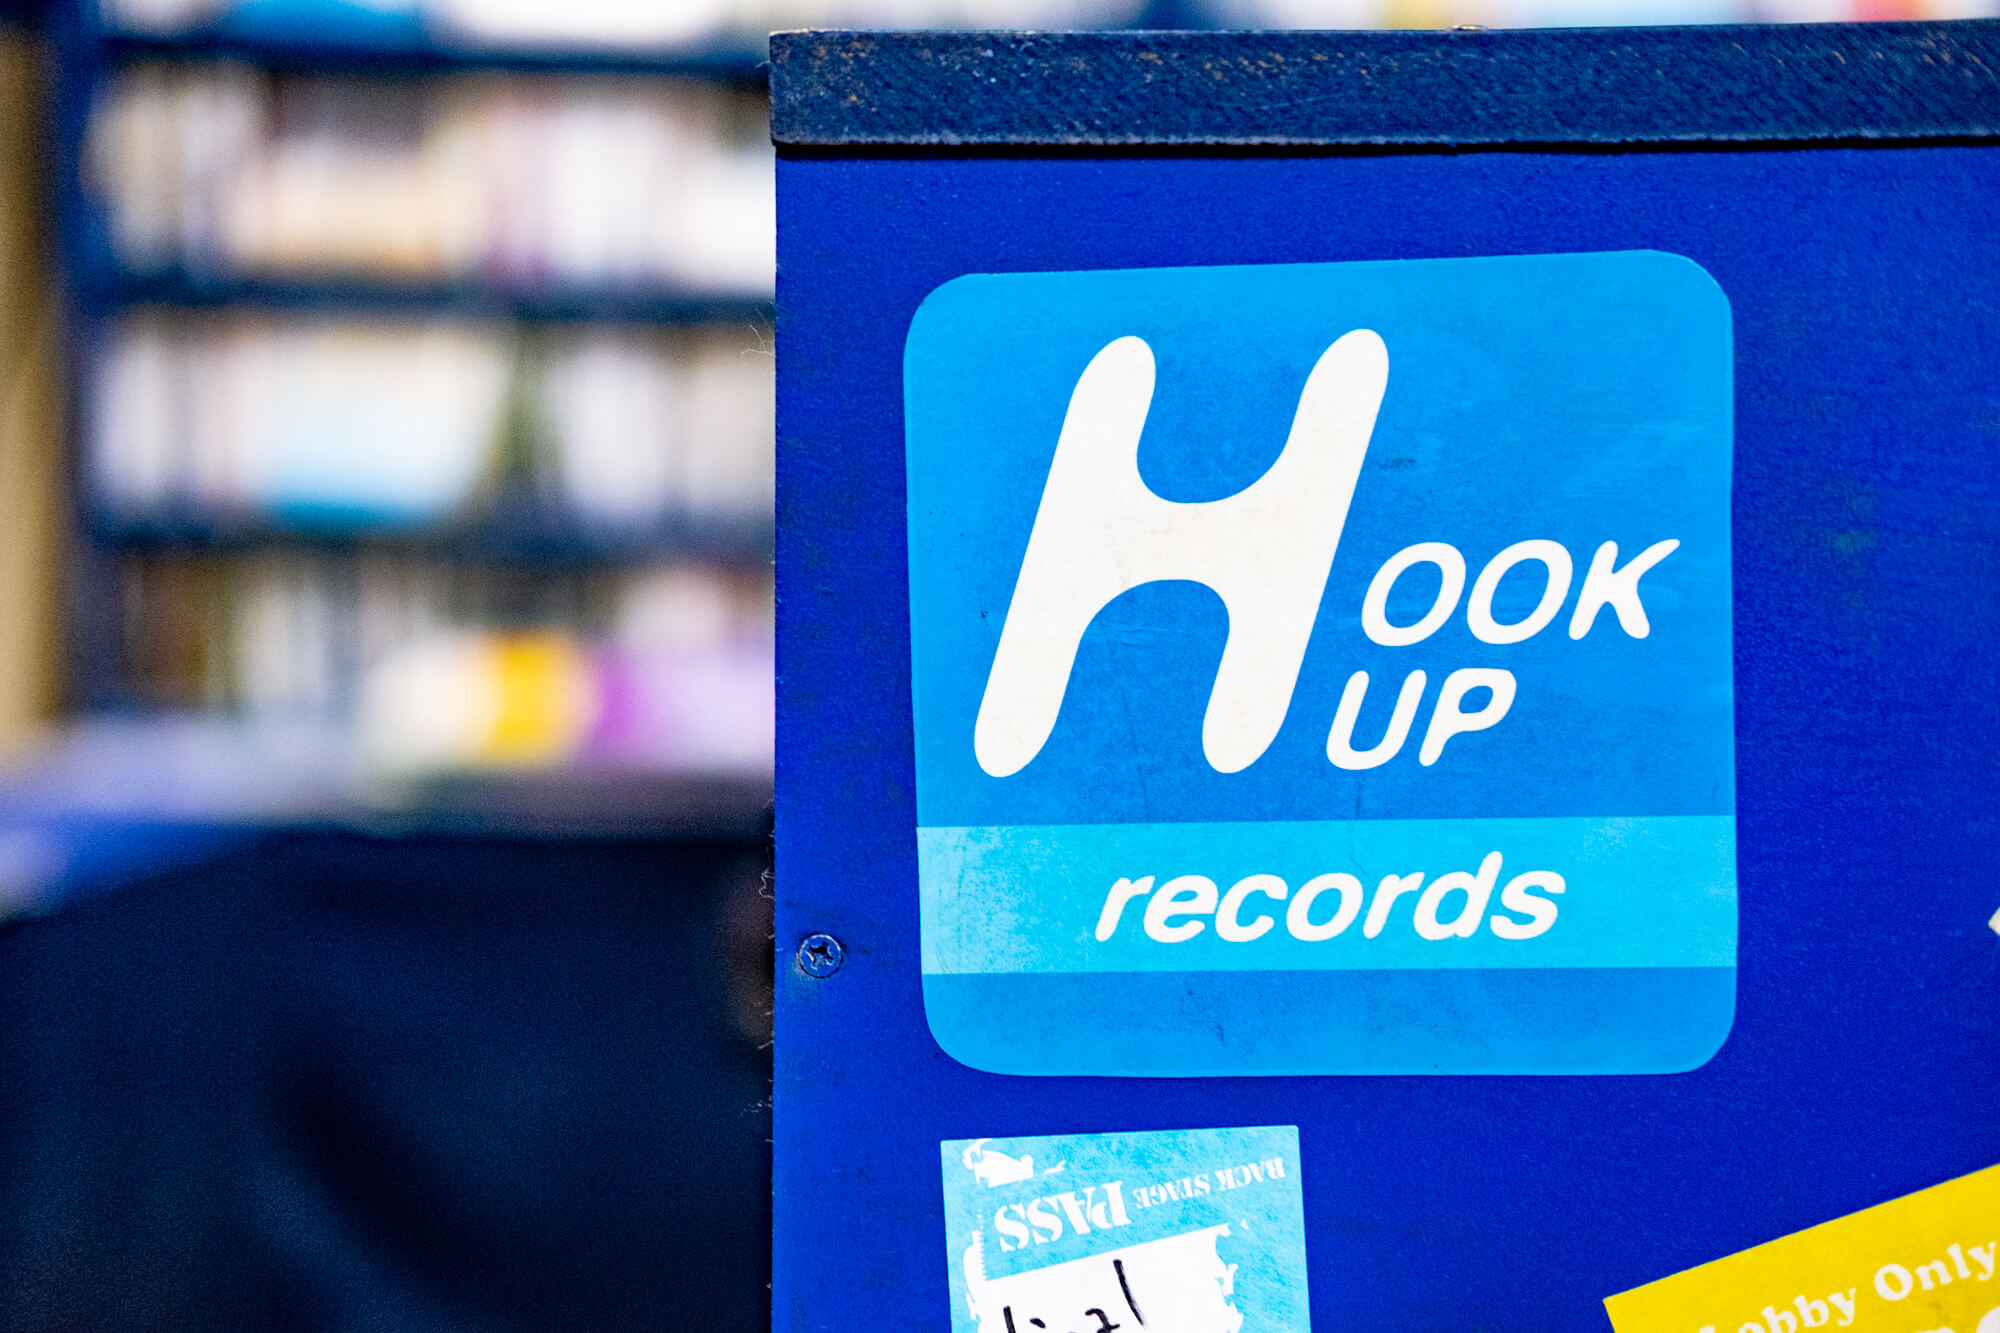 HOOK UP RECORDS